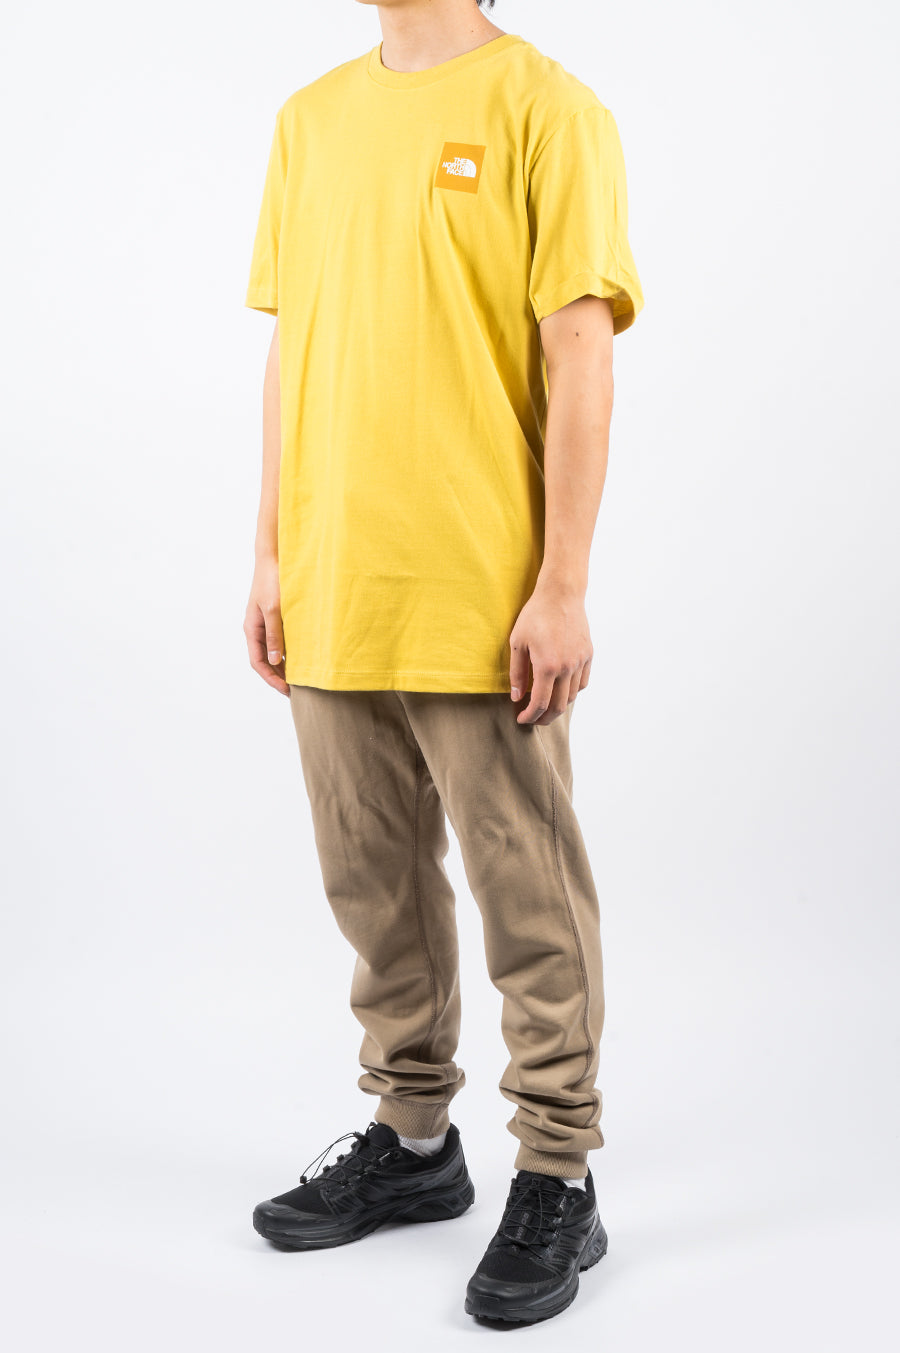 THE NORTH FACE SS BOX TEE YELLOW - BLENDS